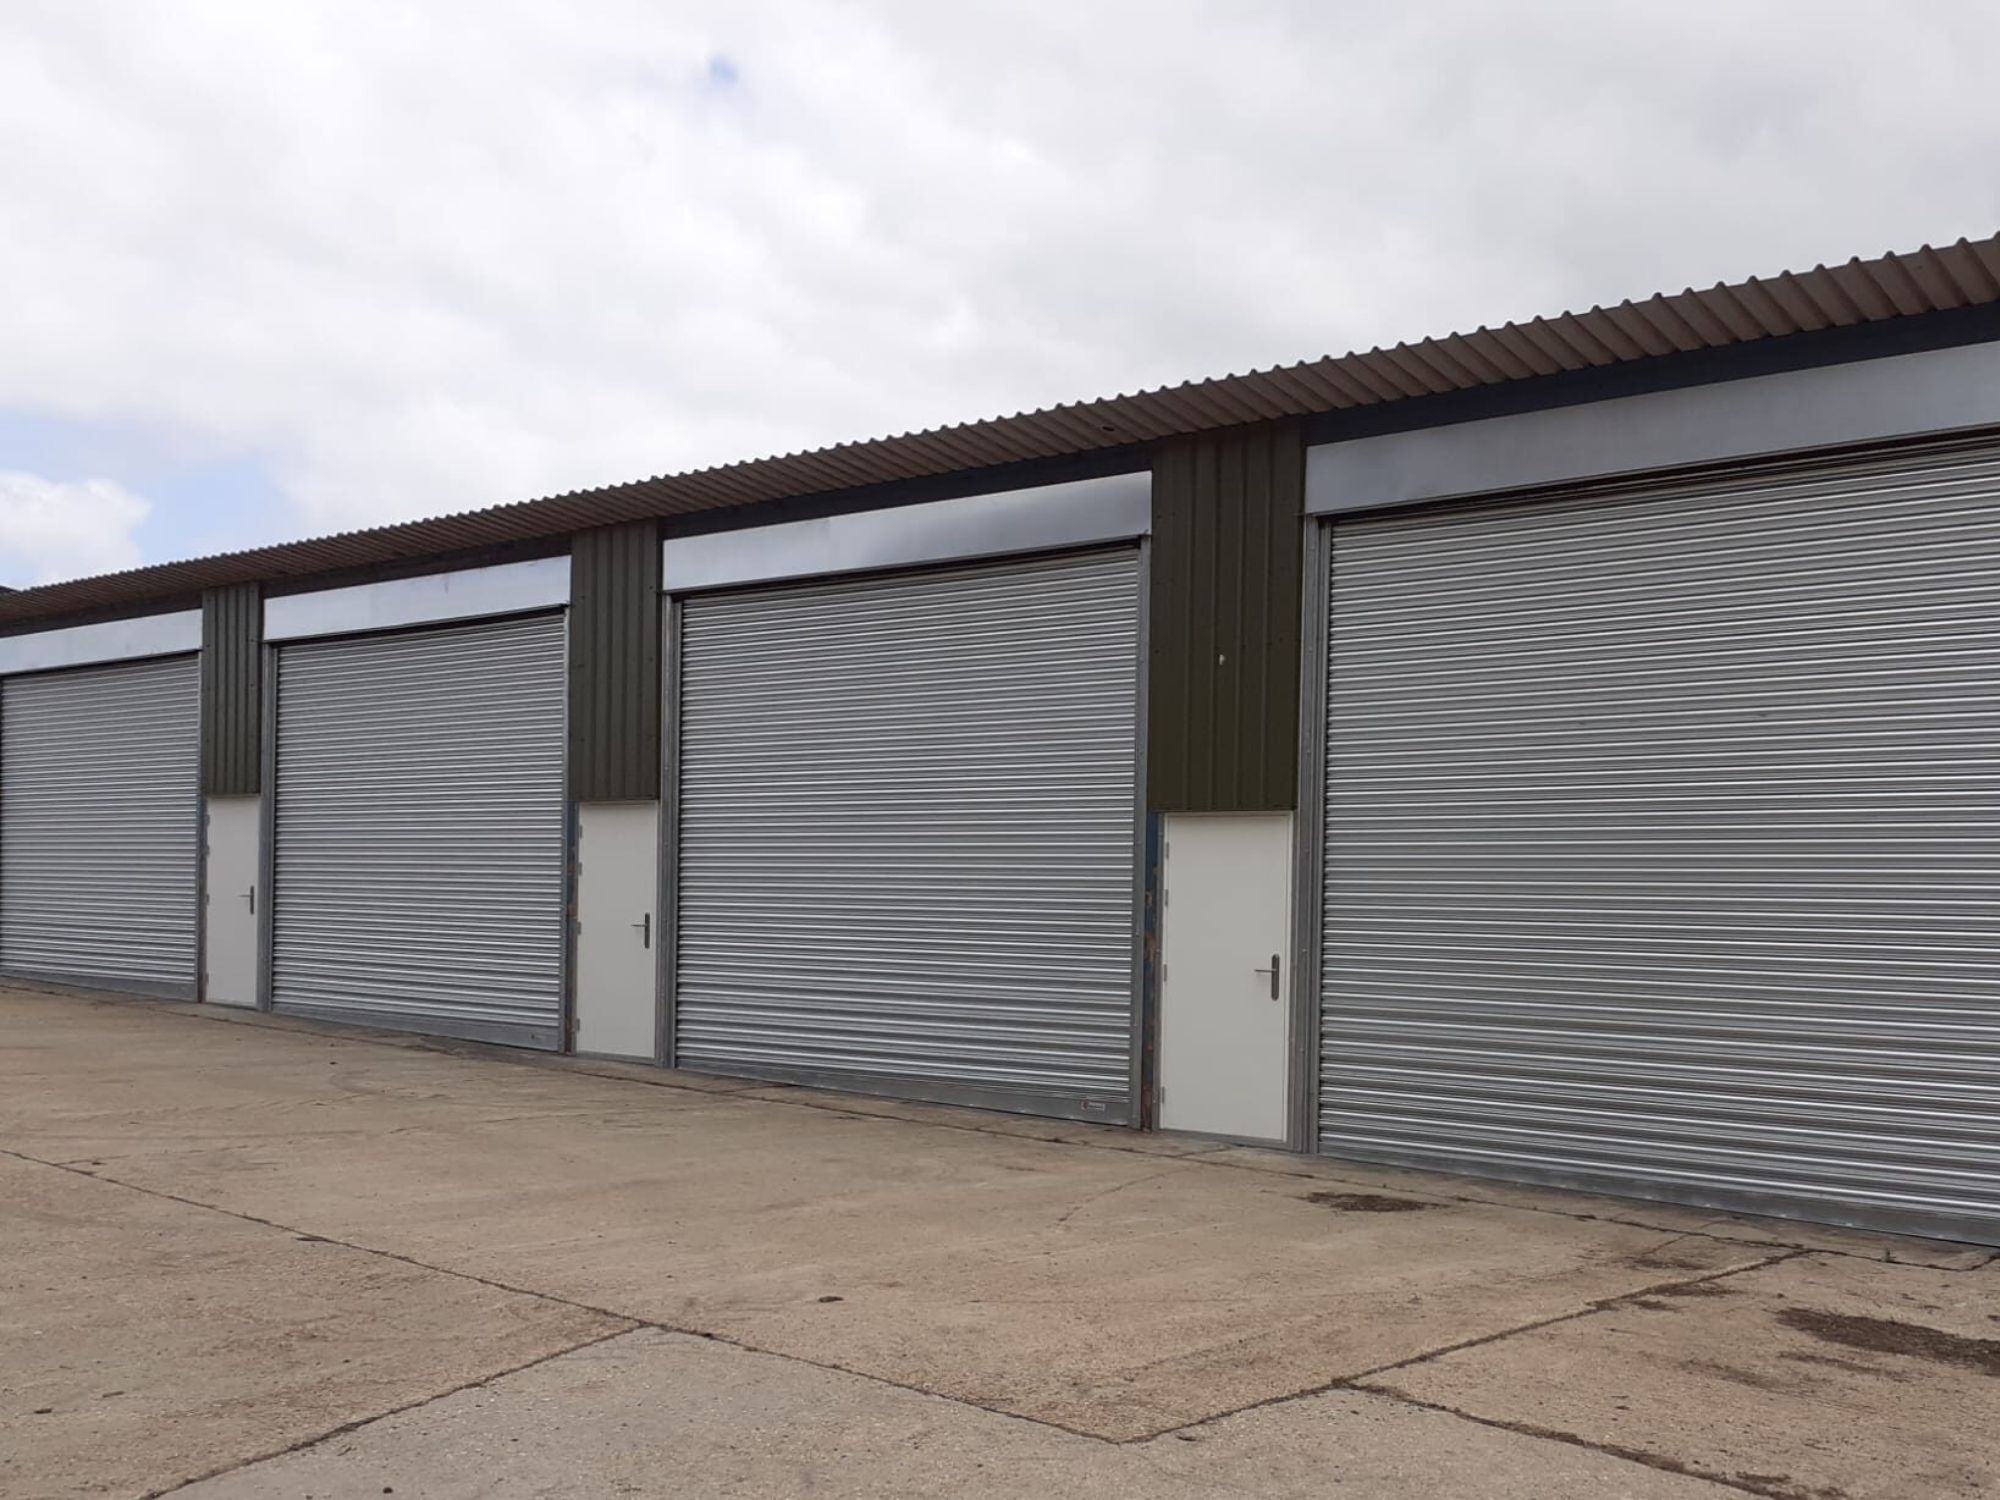 Warehouses to Let near Braintree, Essex